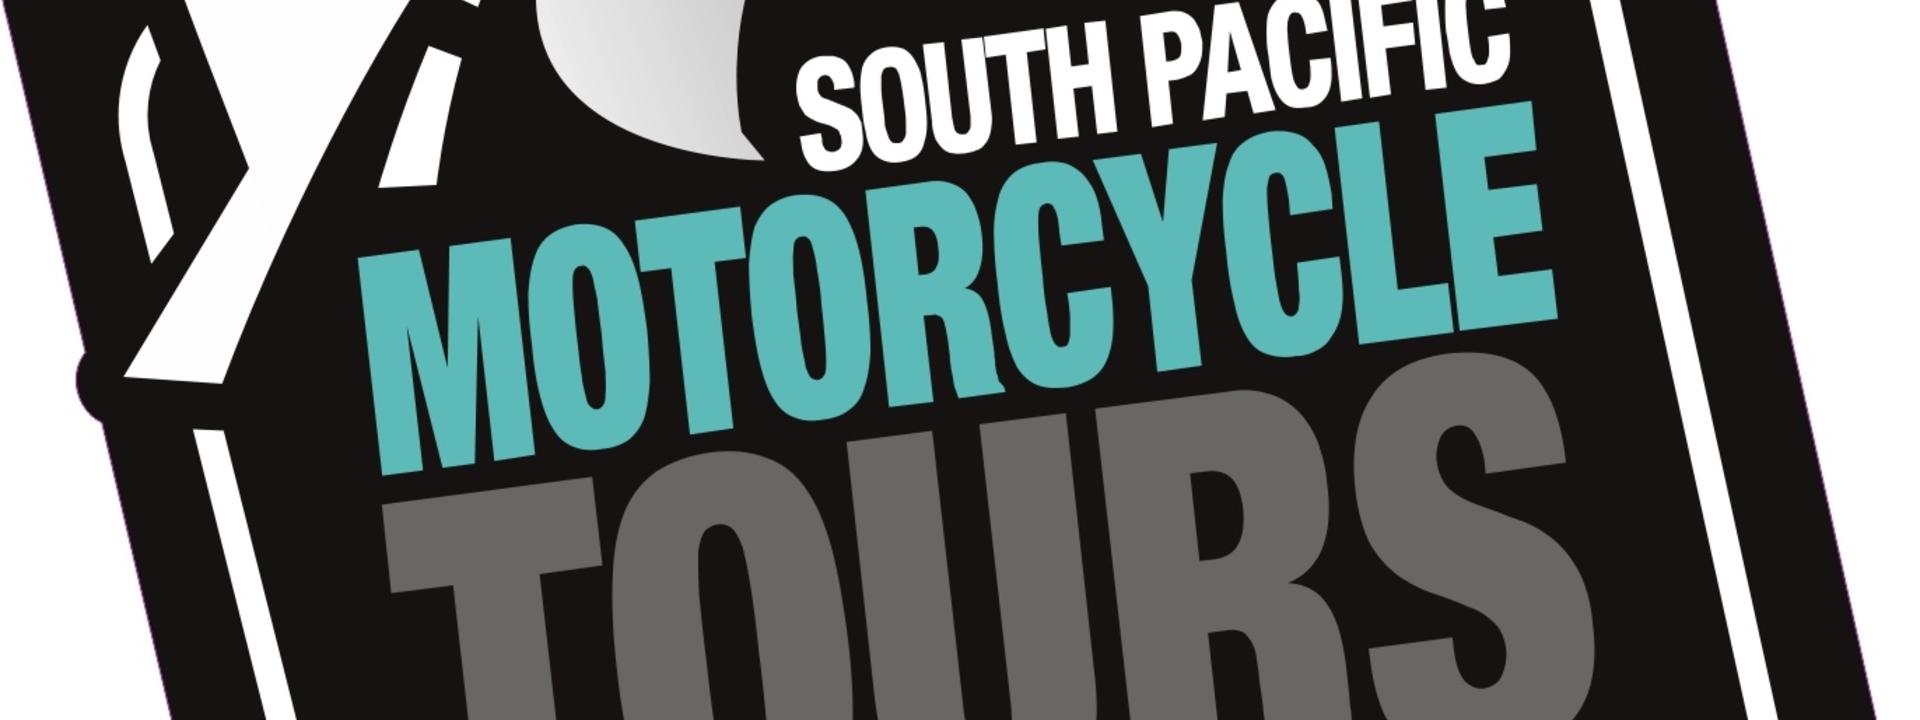 Logo: South Pacific Motorcycle Tours New Zealand